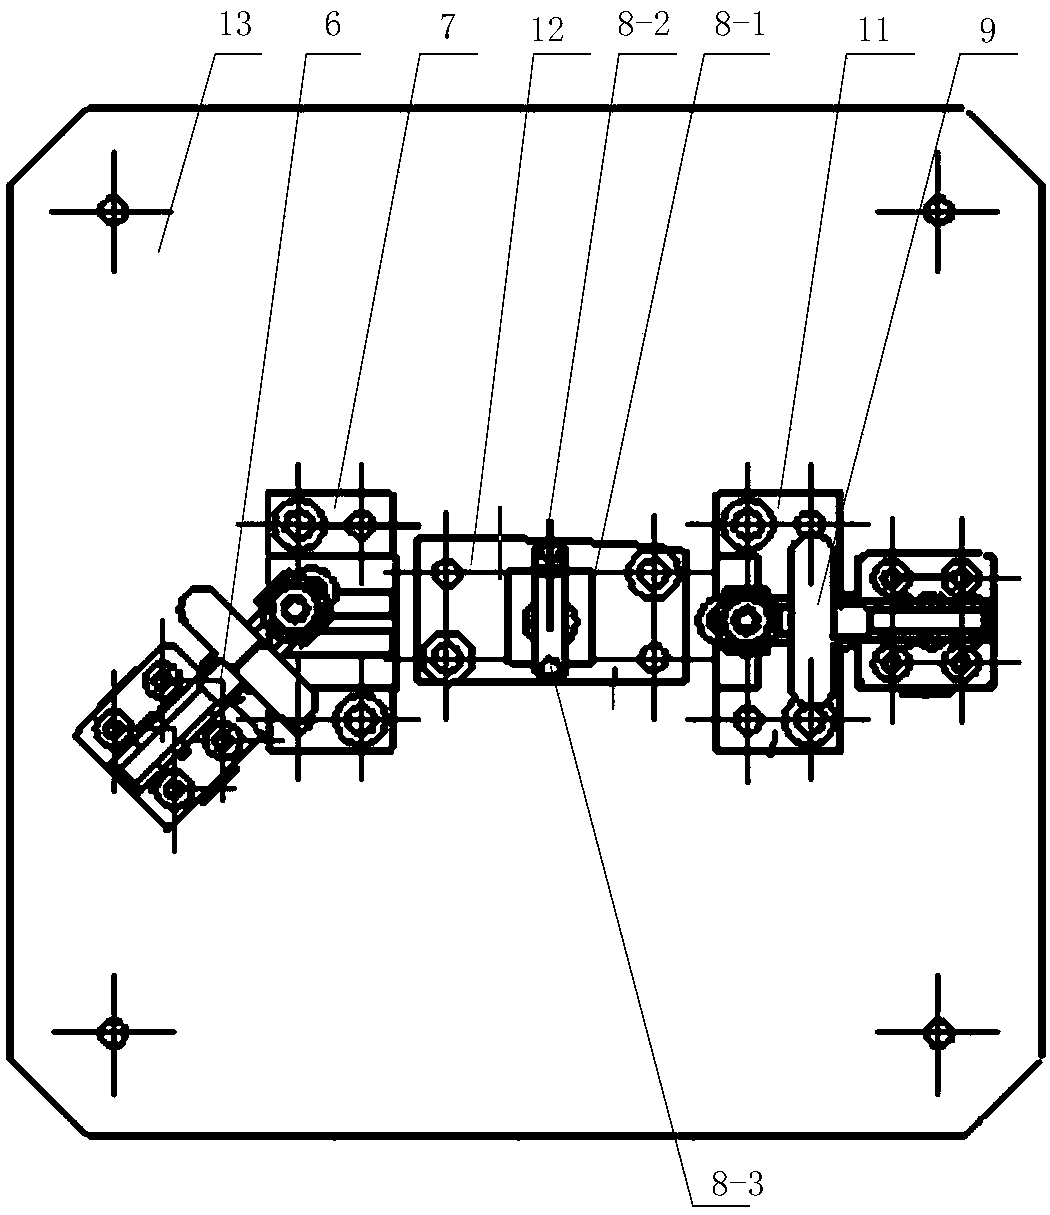 Measurement system for front and back edge positions of engine guide vane